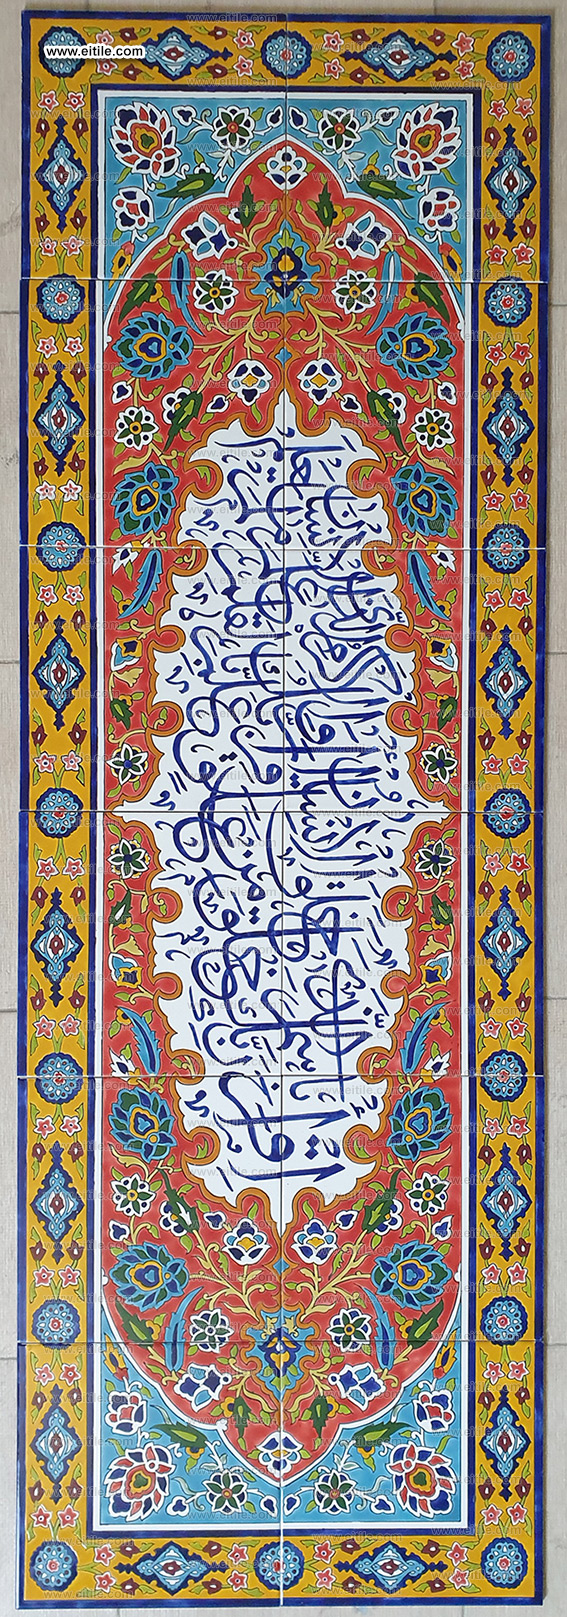 Tile panels with Arabic calligraphy, www.eitile.com